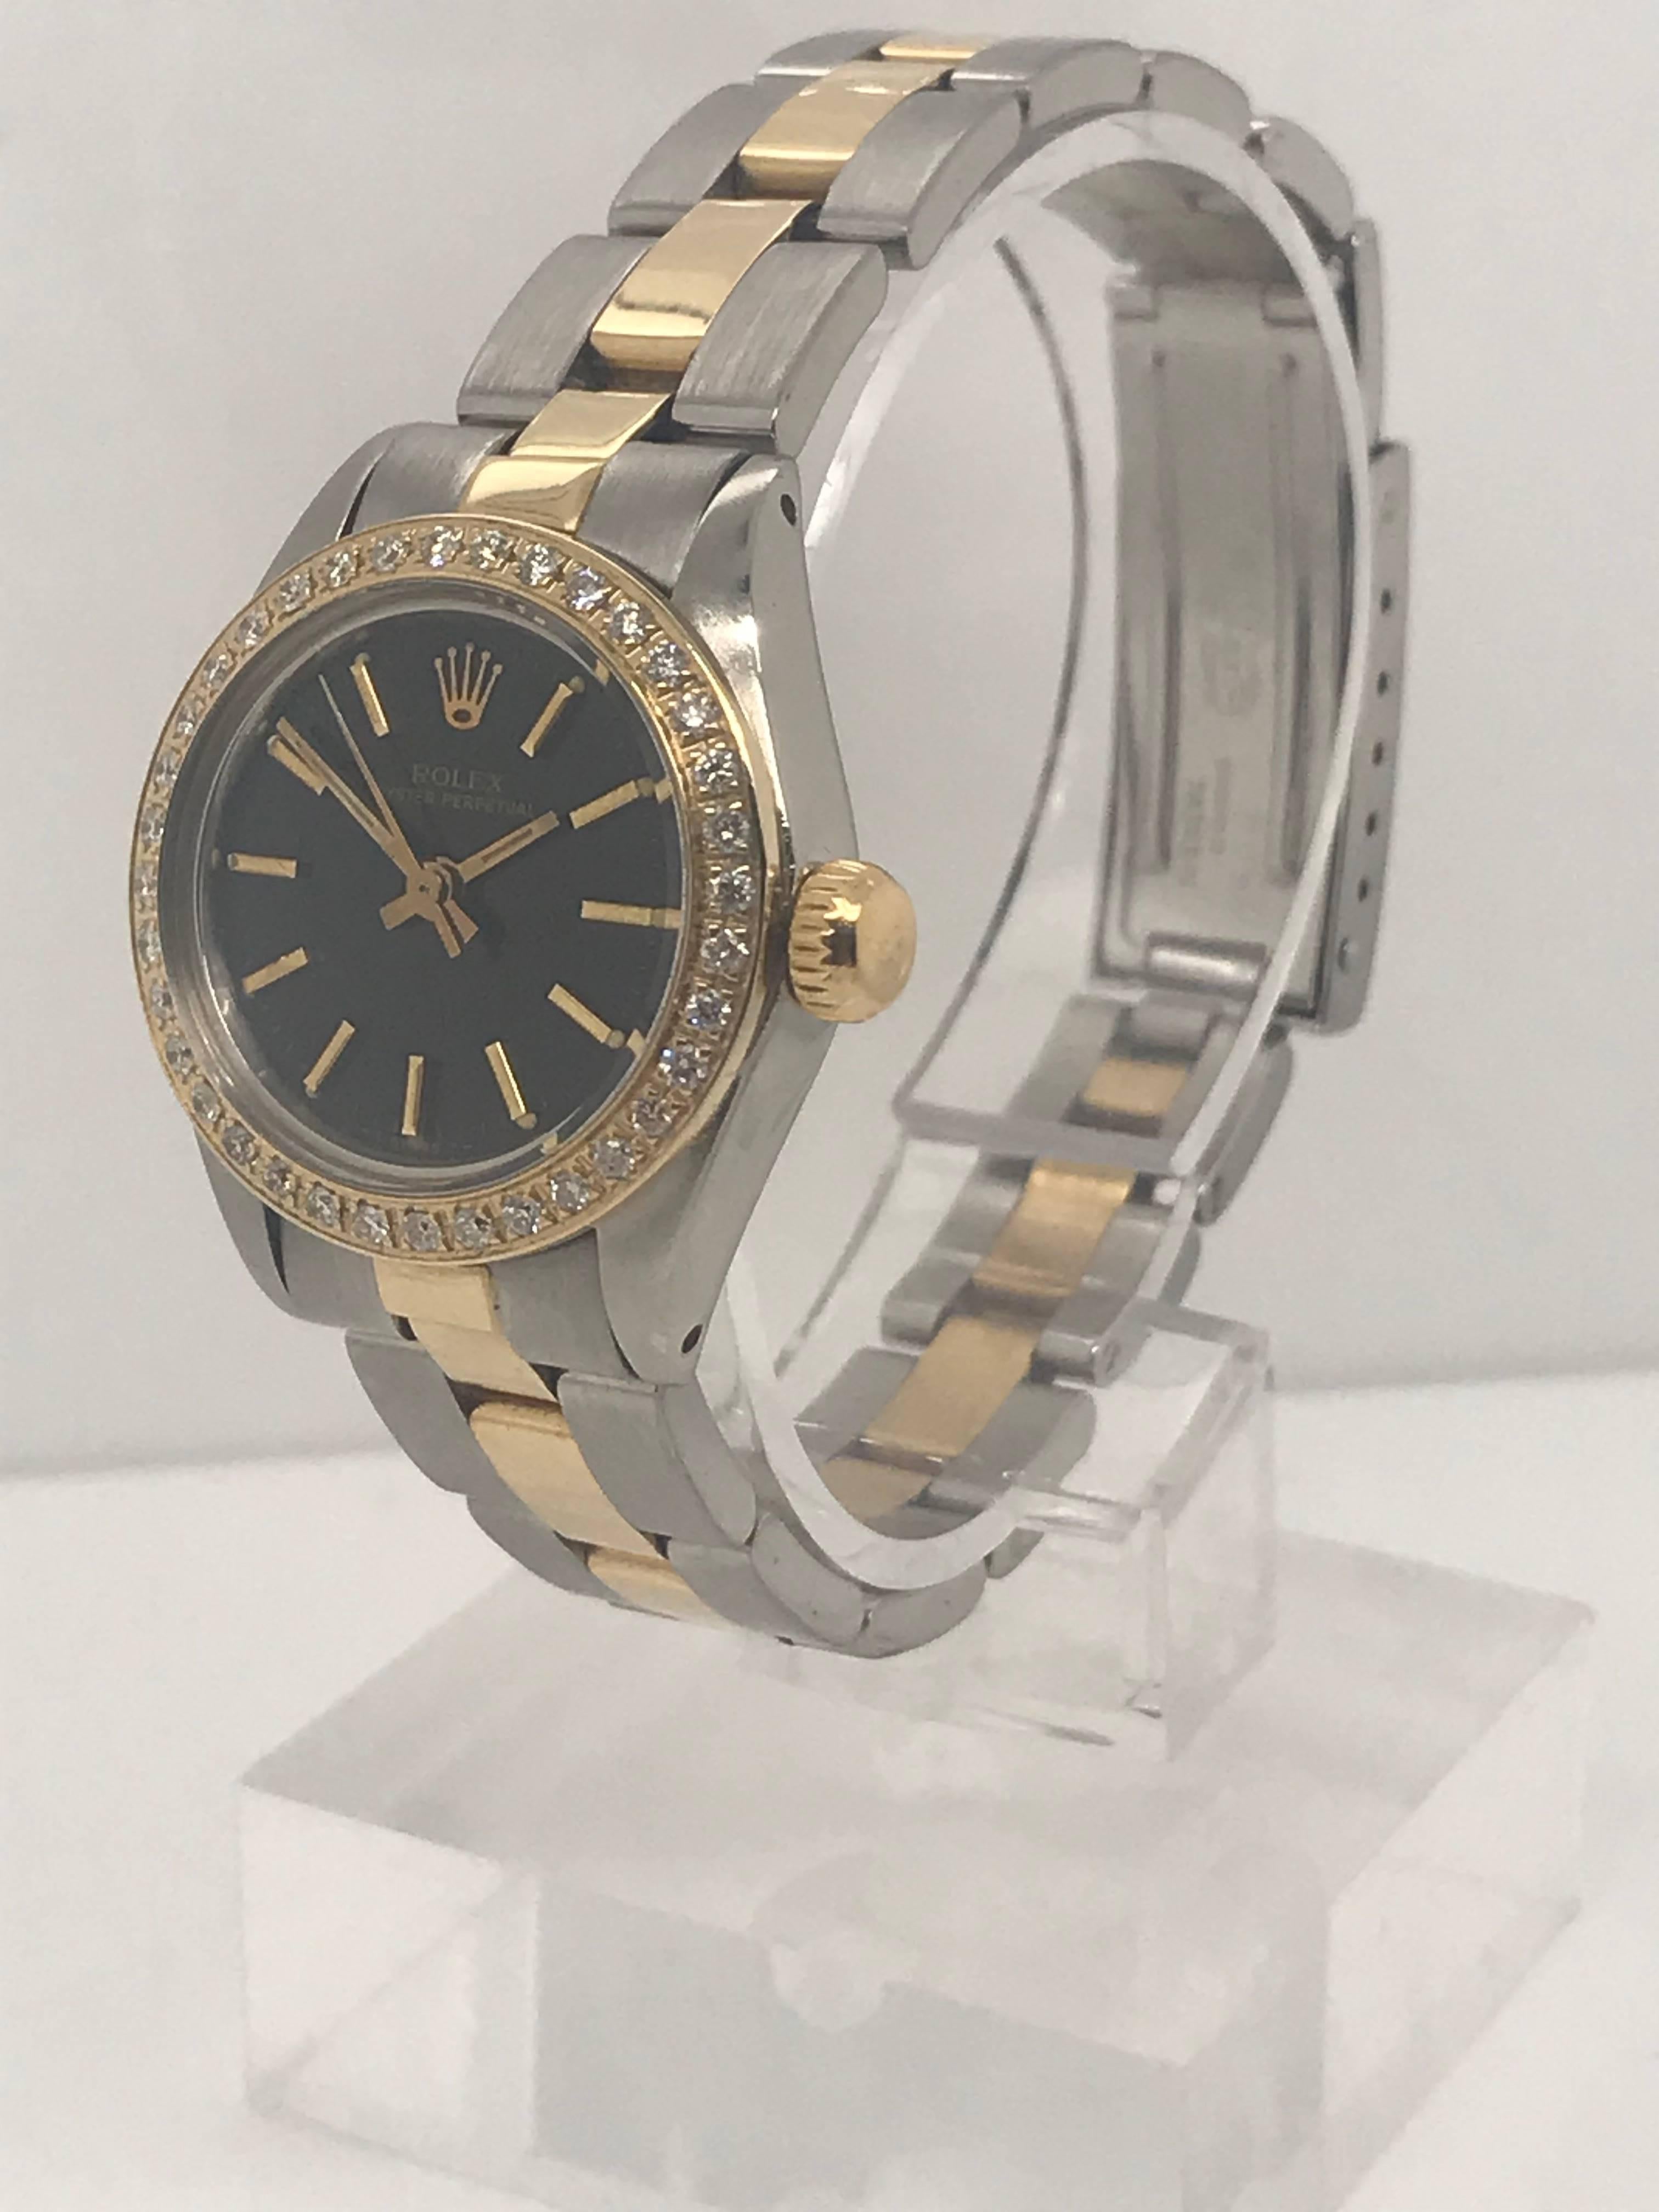 Two-tone, Ladies Oyster Perpetual Rolex made of 18 karat yellow gold and stainless steel with black dial and round diamond bezel. Circa 1980. 

This timepiece was recently serviced by a Rolex certified watchmaker. 